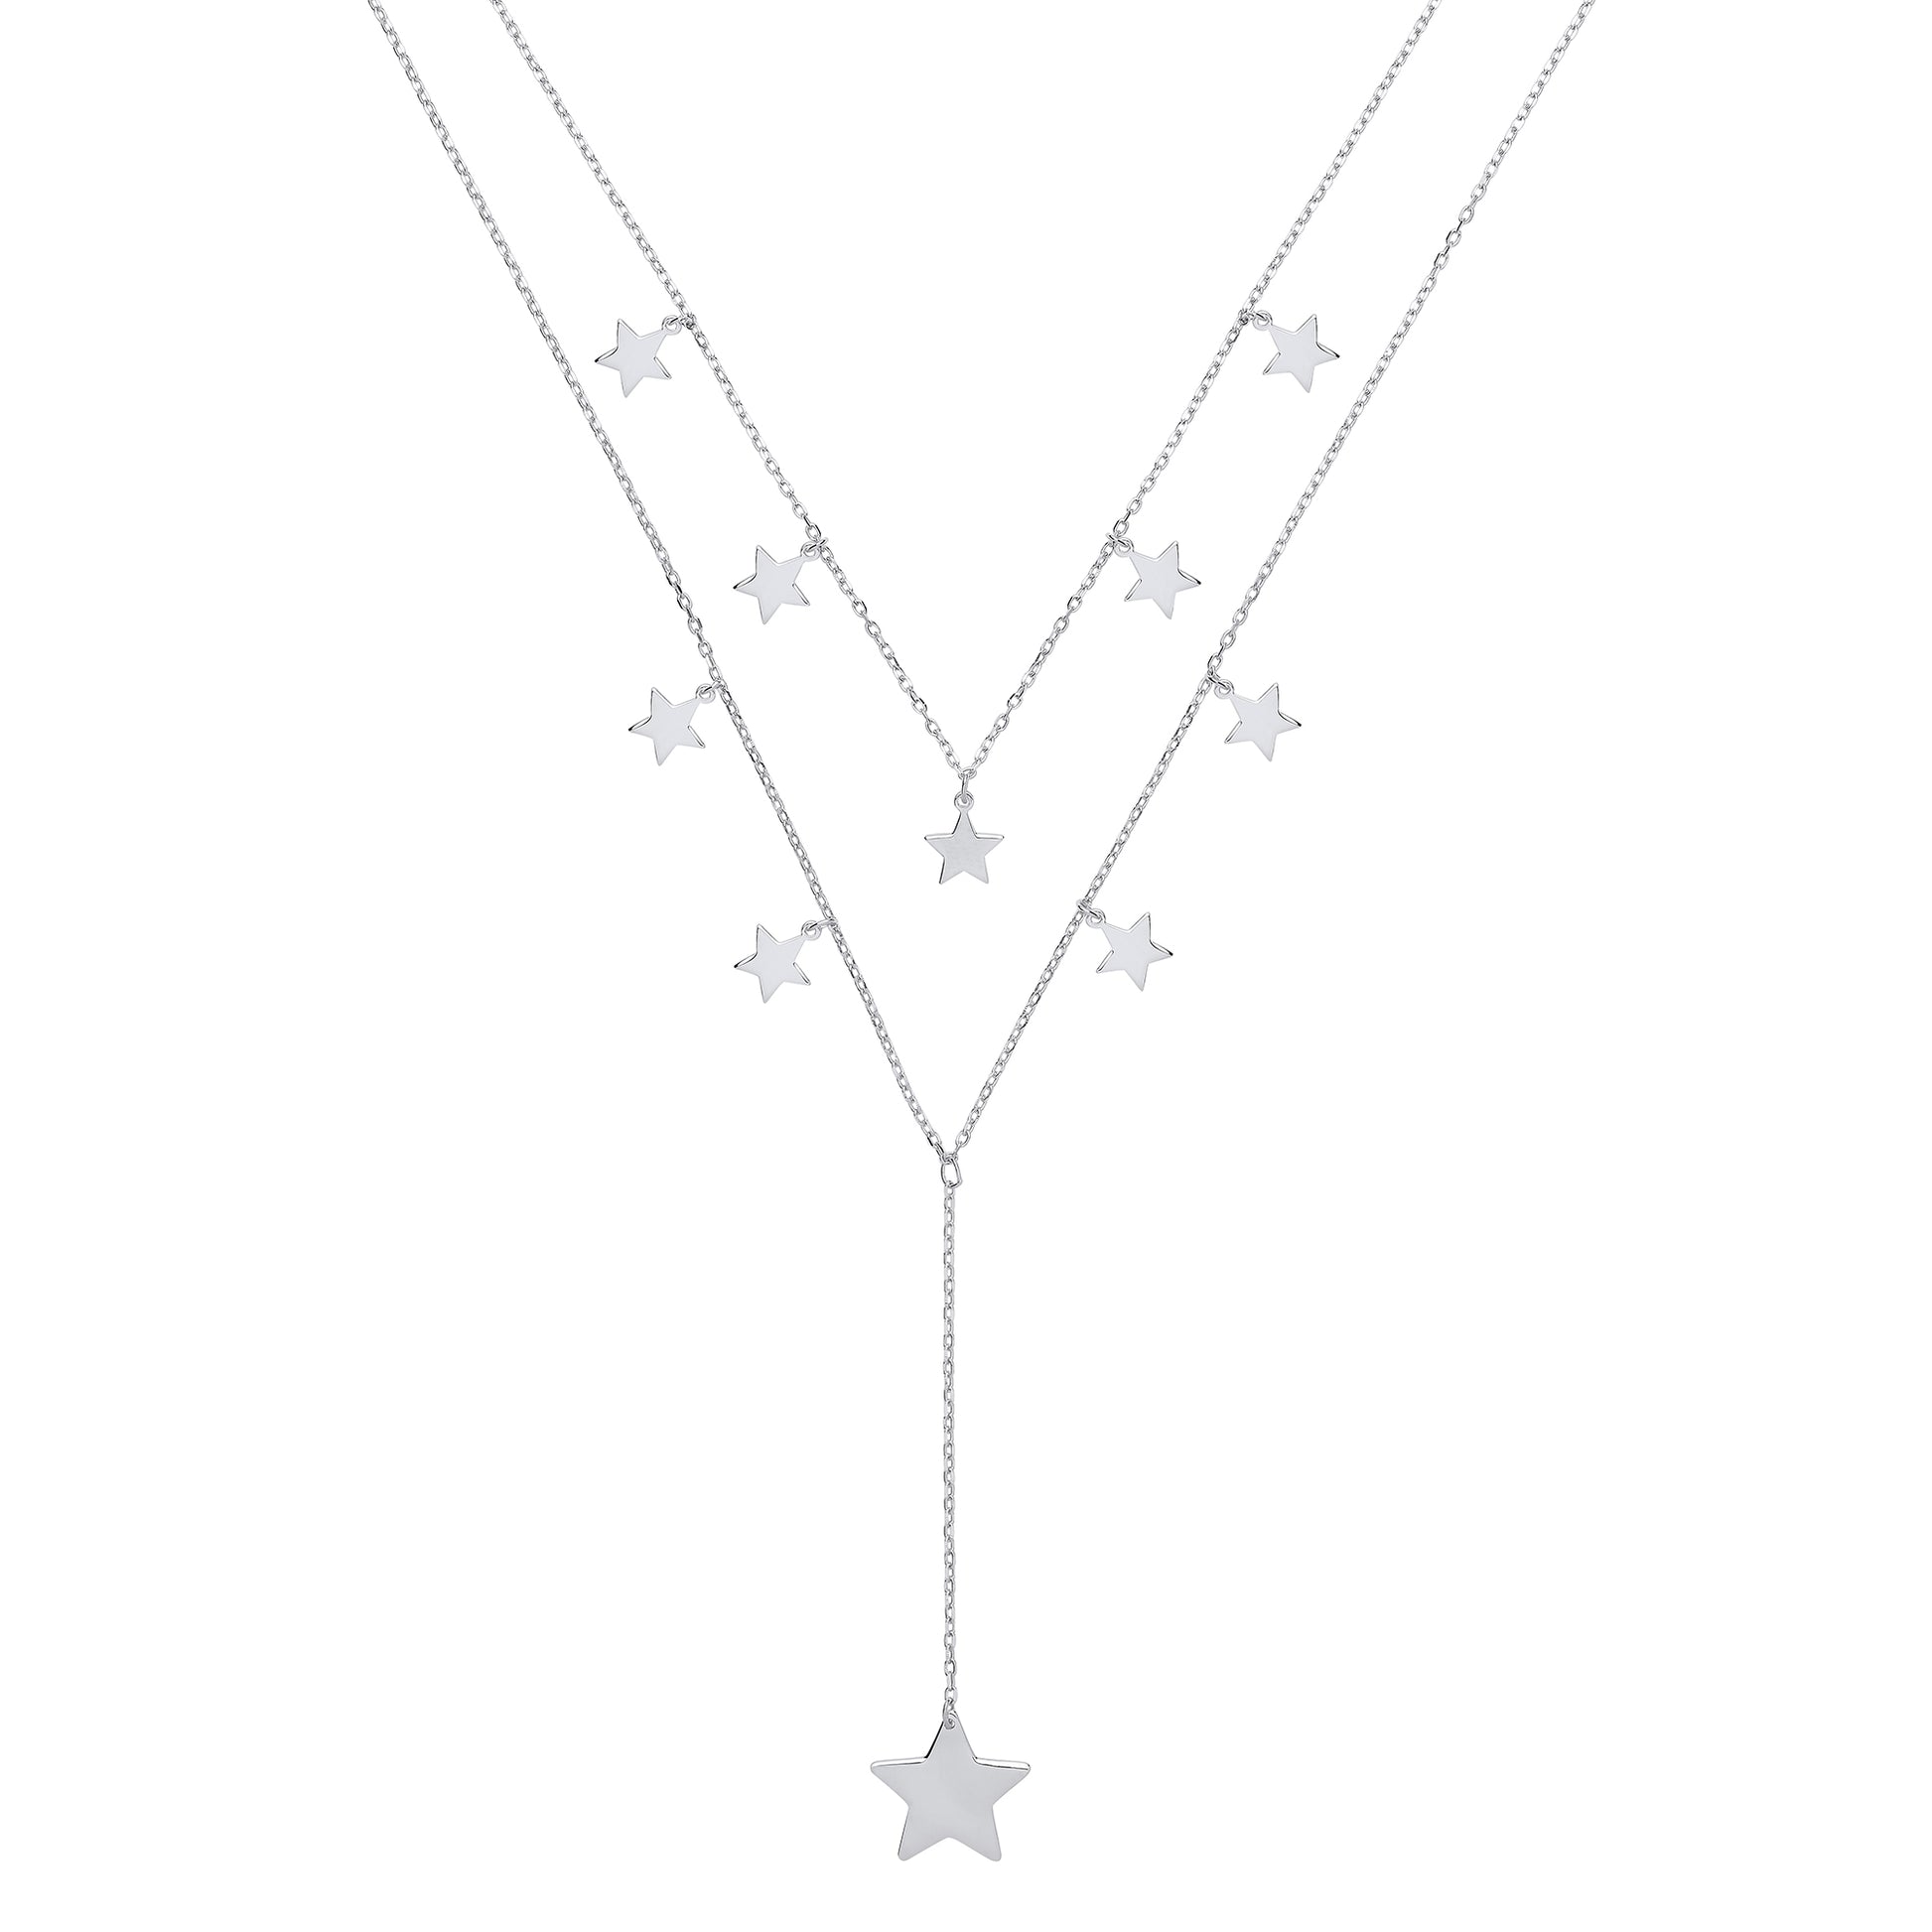 Silver  Galaxy Star Cluster Charm Necklace 16 inch - GVK279